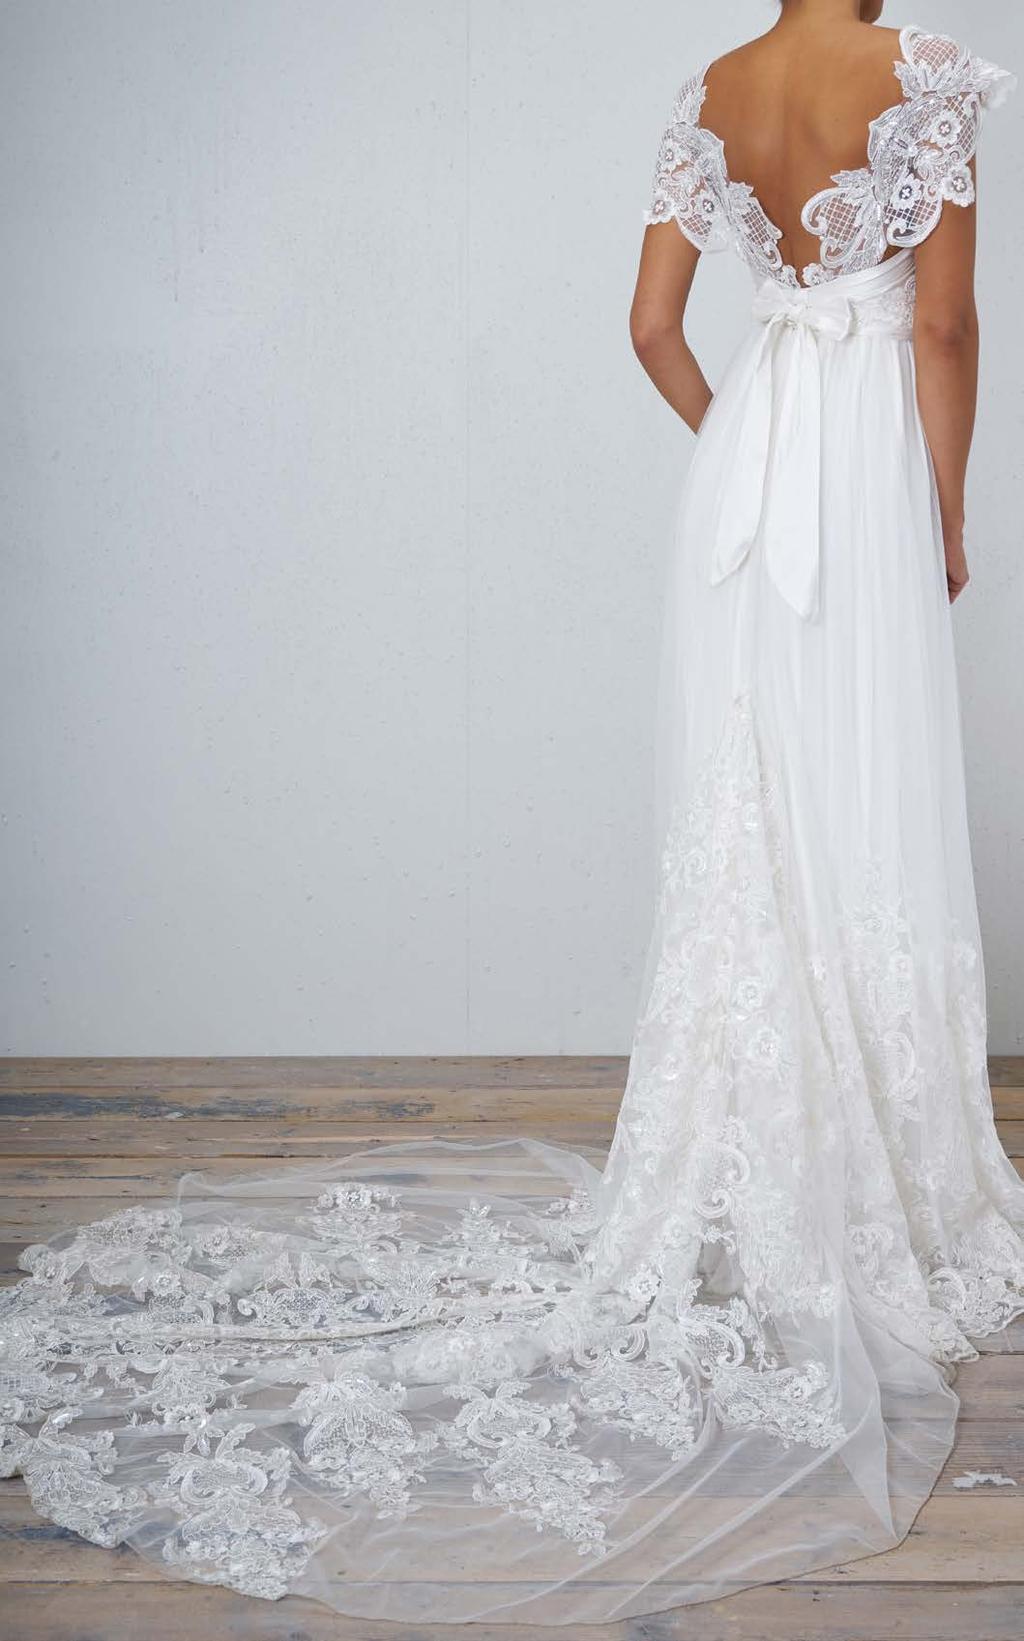 Full, ethereal silk tulle is softly accented with an ivory embroidered lace overlay.